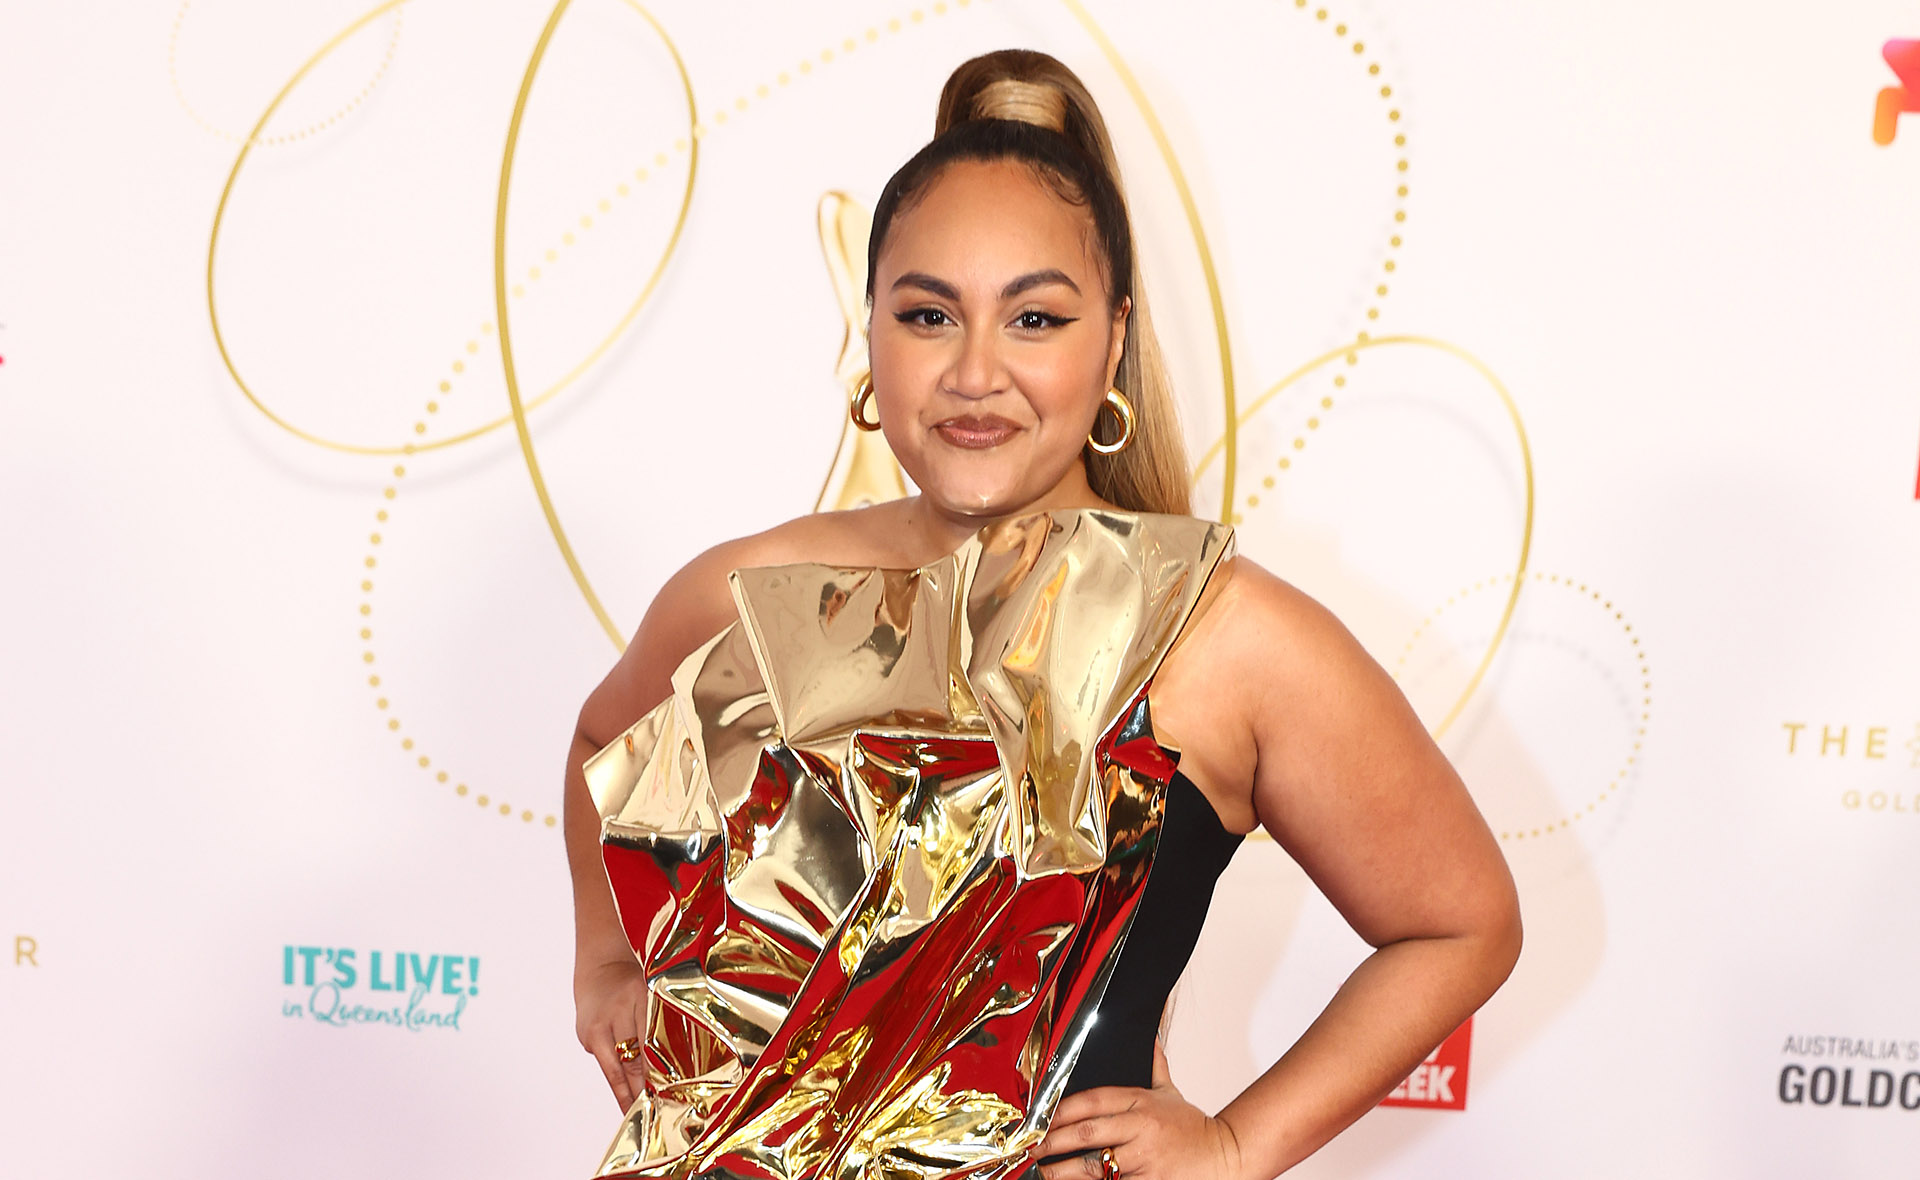 EXCLUSIVE: Jessica Mauboy relives the moment that ‘created her’ at the TV WEEK Logies